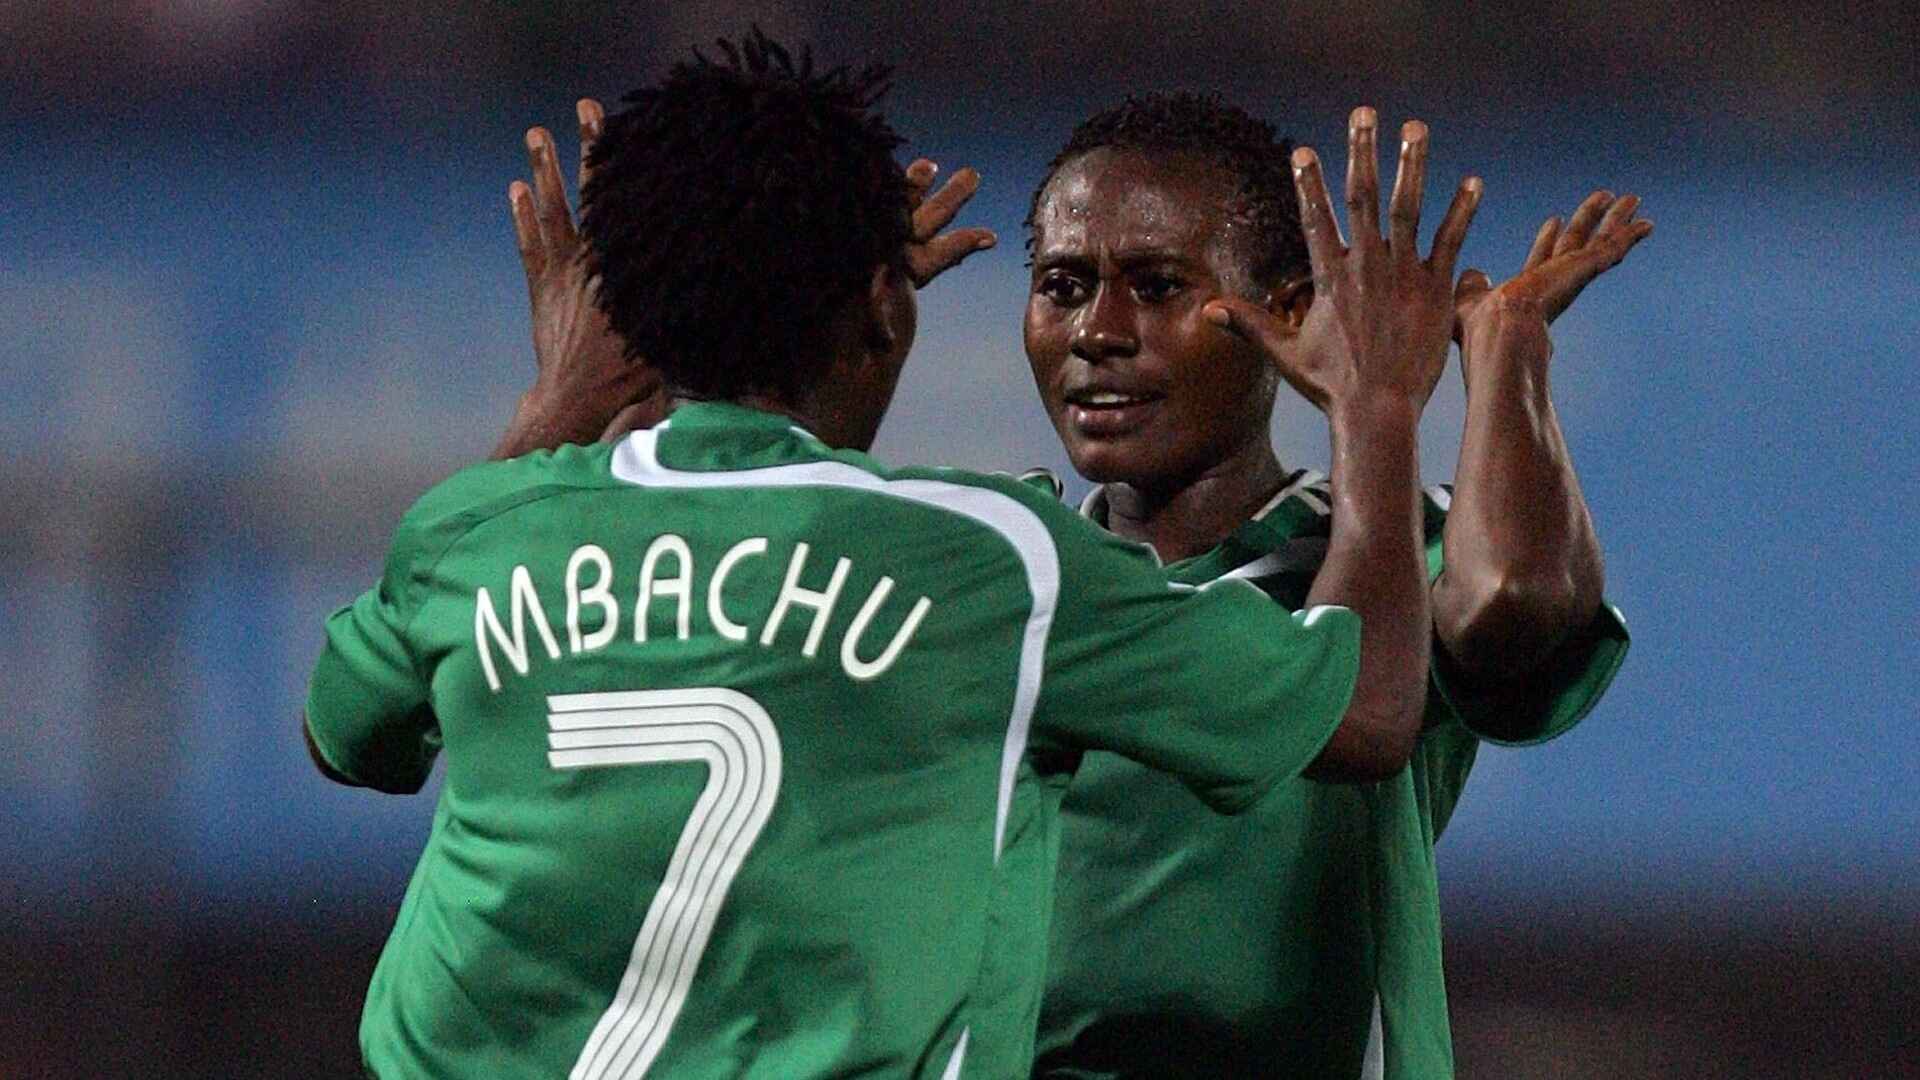 Lesbianism was not rampant in our time - Former Super Falcons star, Stella Mbachu